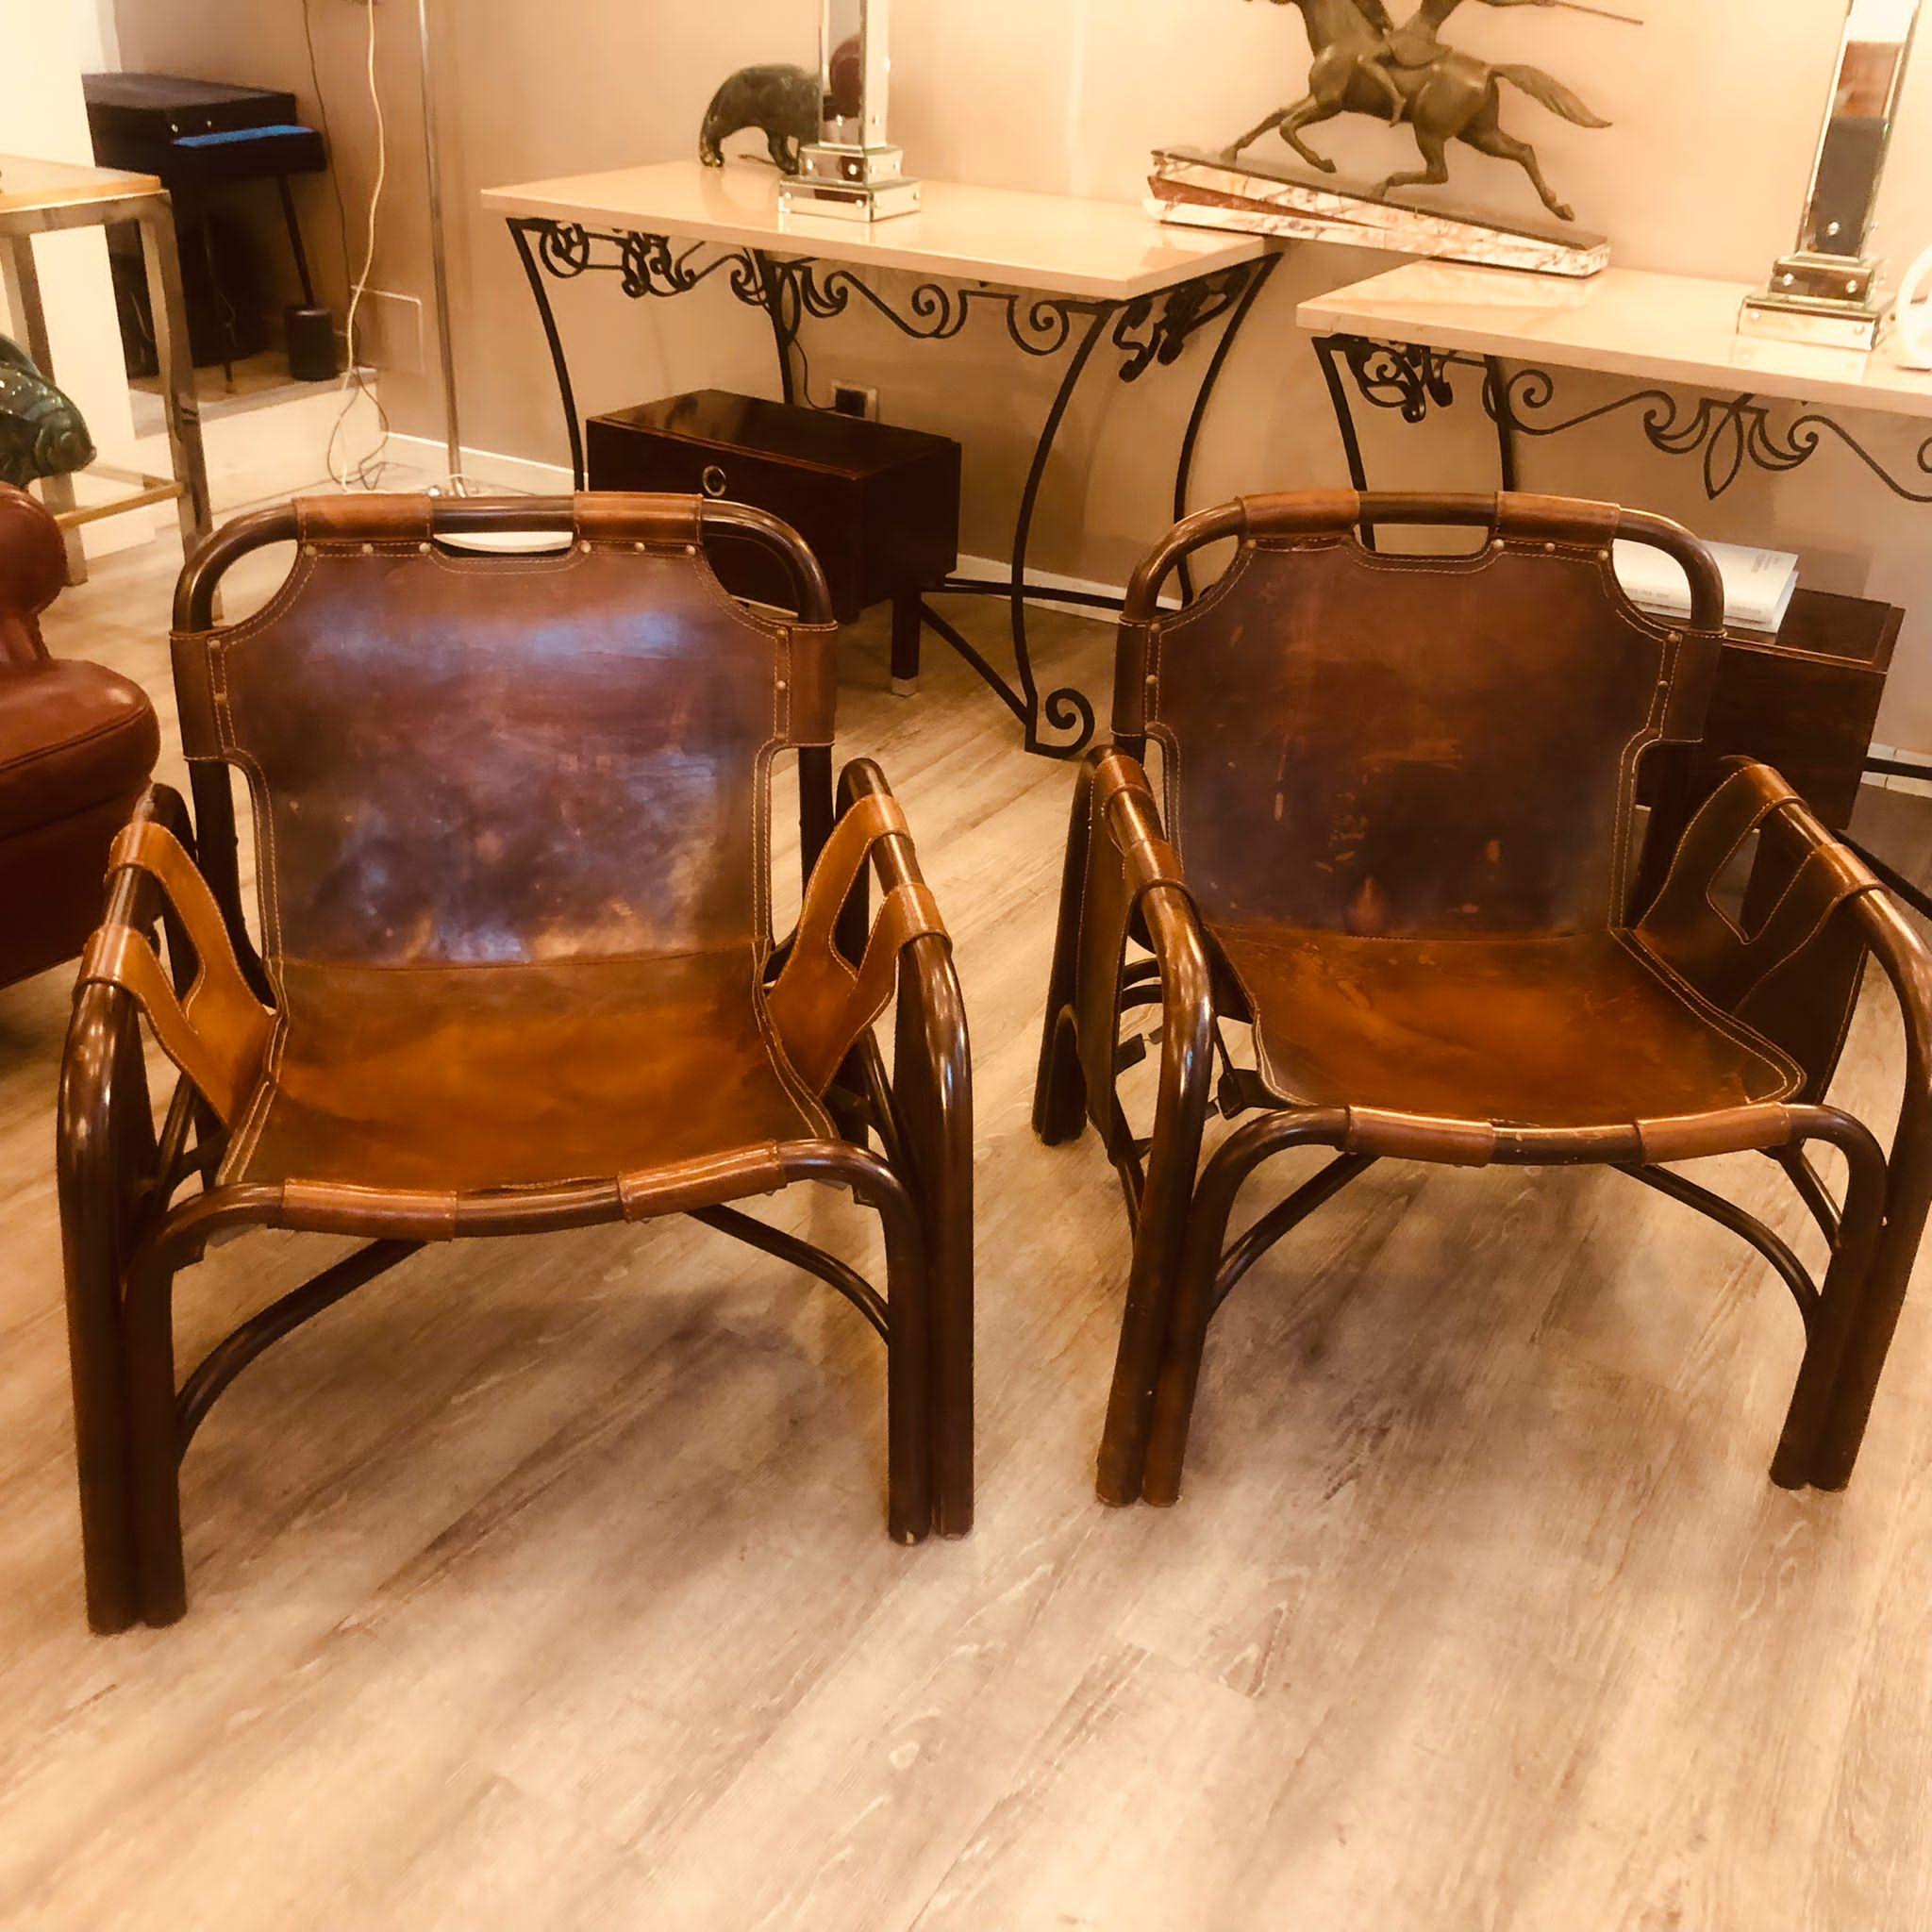 Tito Agnoli 1960s bamboo and brown leather armchairs, set of 2 
Good conditions. No structural damages and no cuts in the leather. Leather has been treated with cream to hydrate it.
Size: W 68 cm D 70 cm H 72 cm 
For their shape and materials